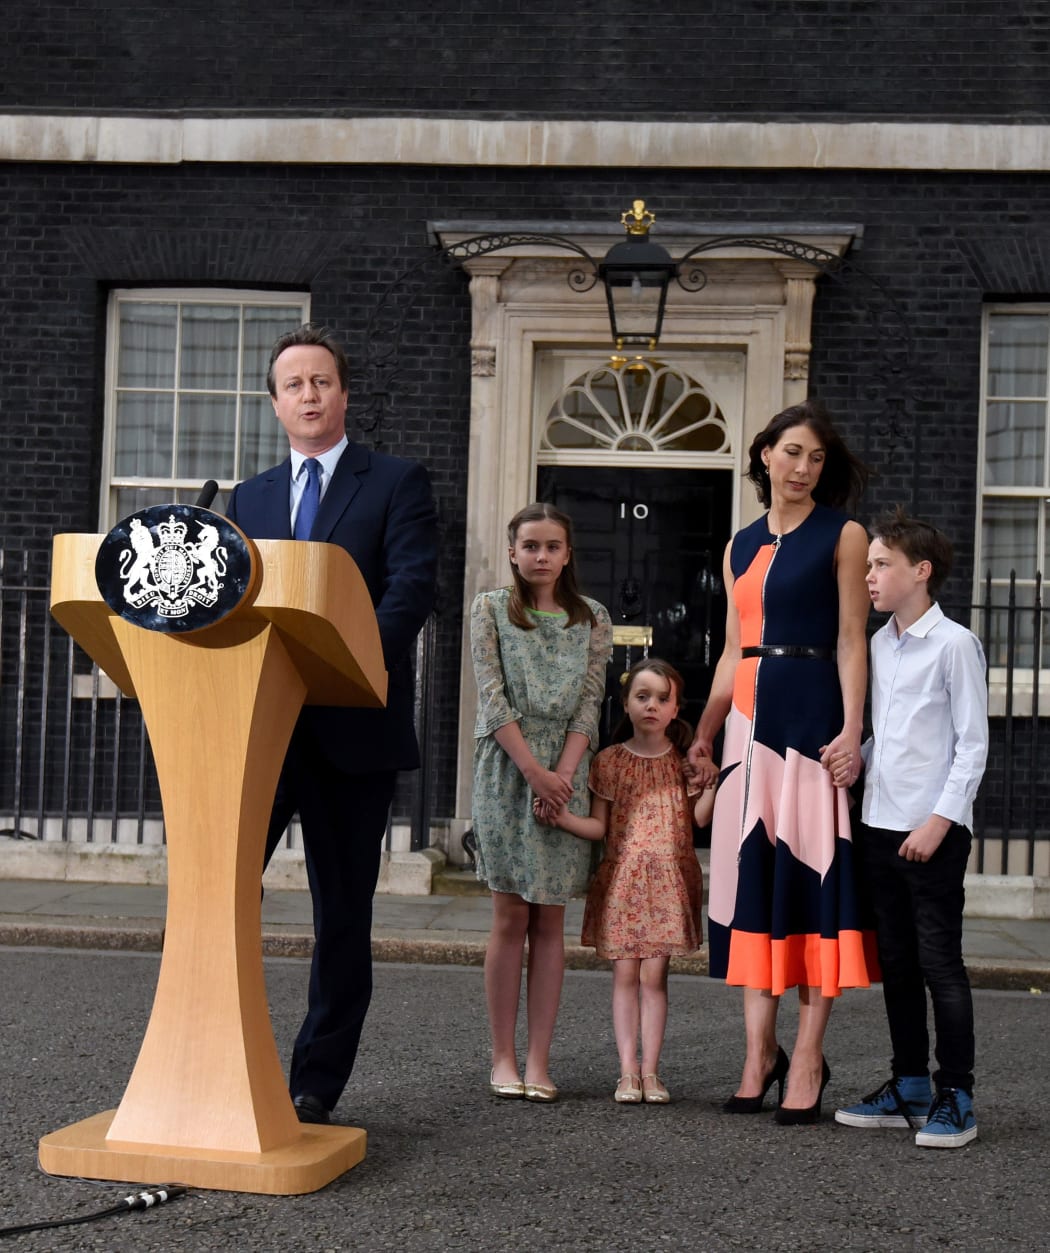 David Cameron leaves Downing Street for the last time with his wife Samantha Cameron and children Nancy Cameron, Arthur Cameron and Florence Cameron on his way to Buckingham Palace on July 13, 2016 in London, England.